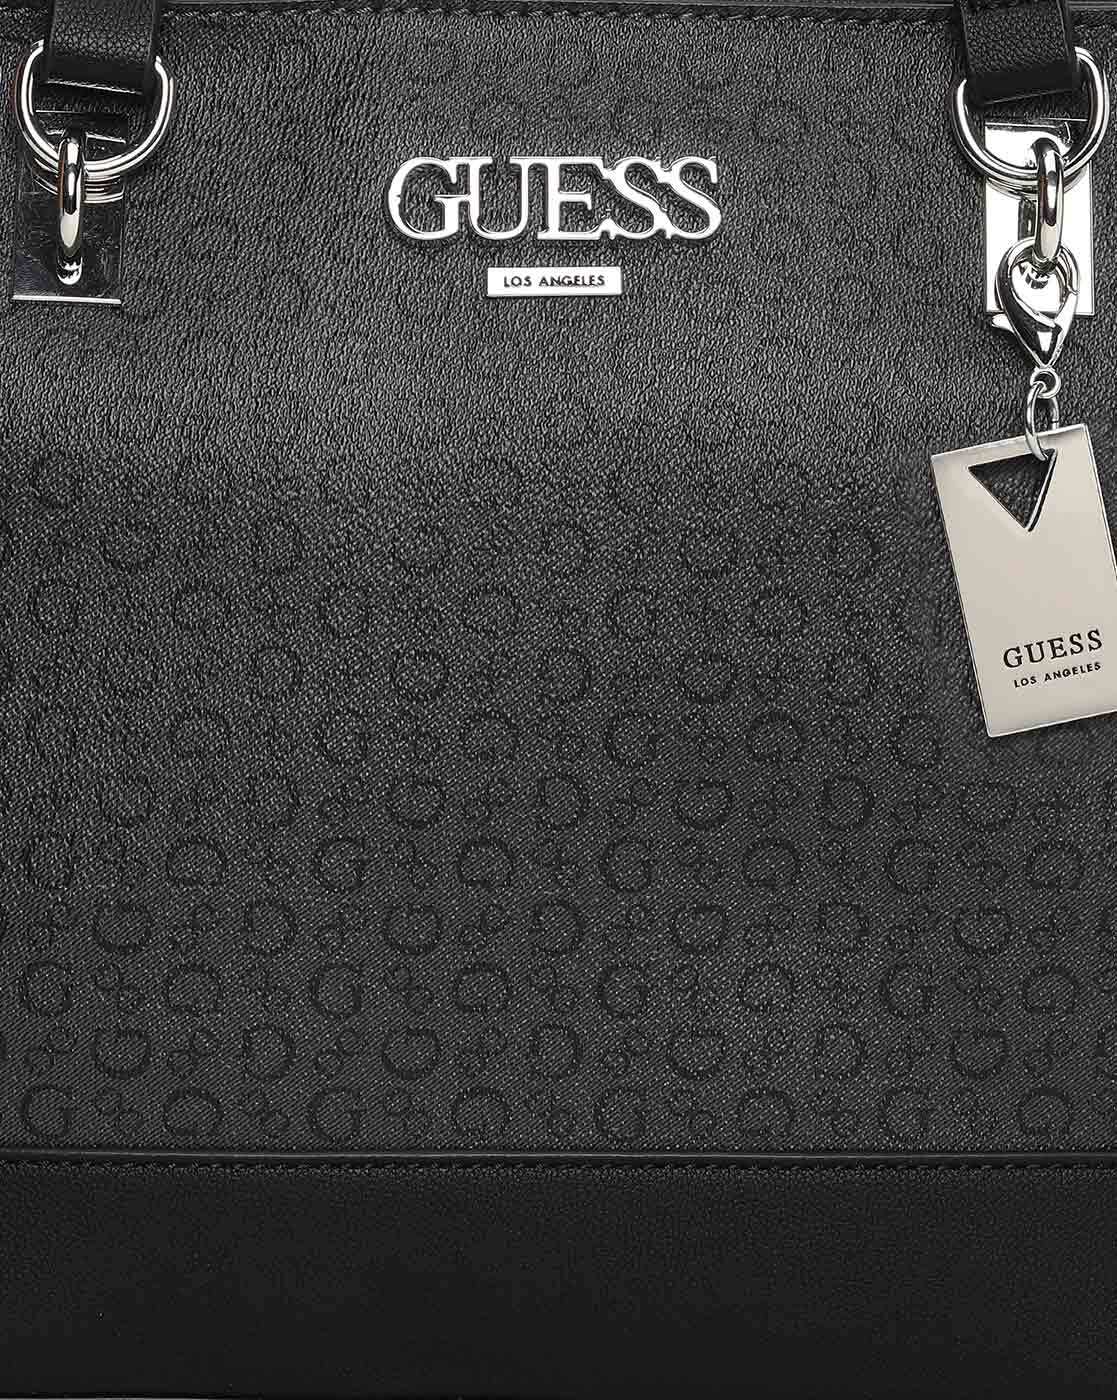 Share 85+ guess bags online best - in.cdgdbentre